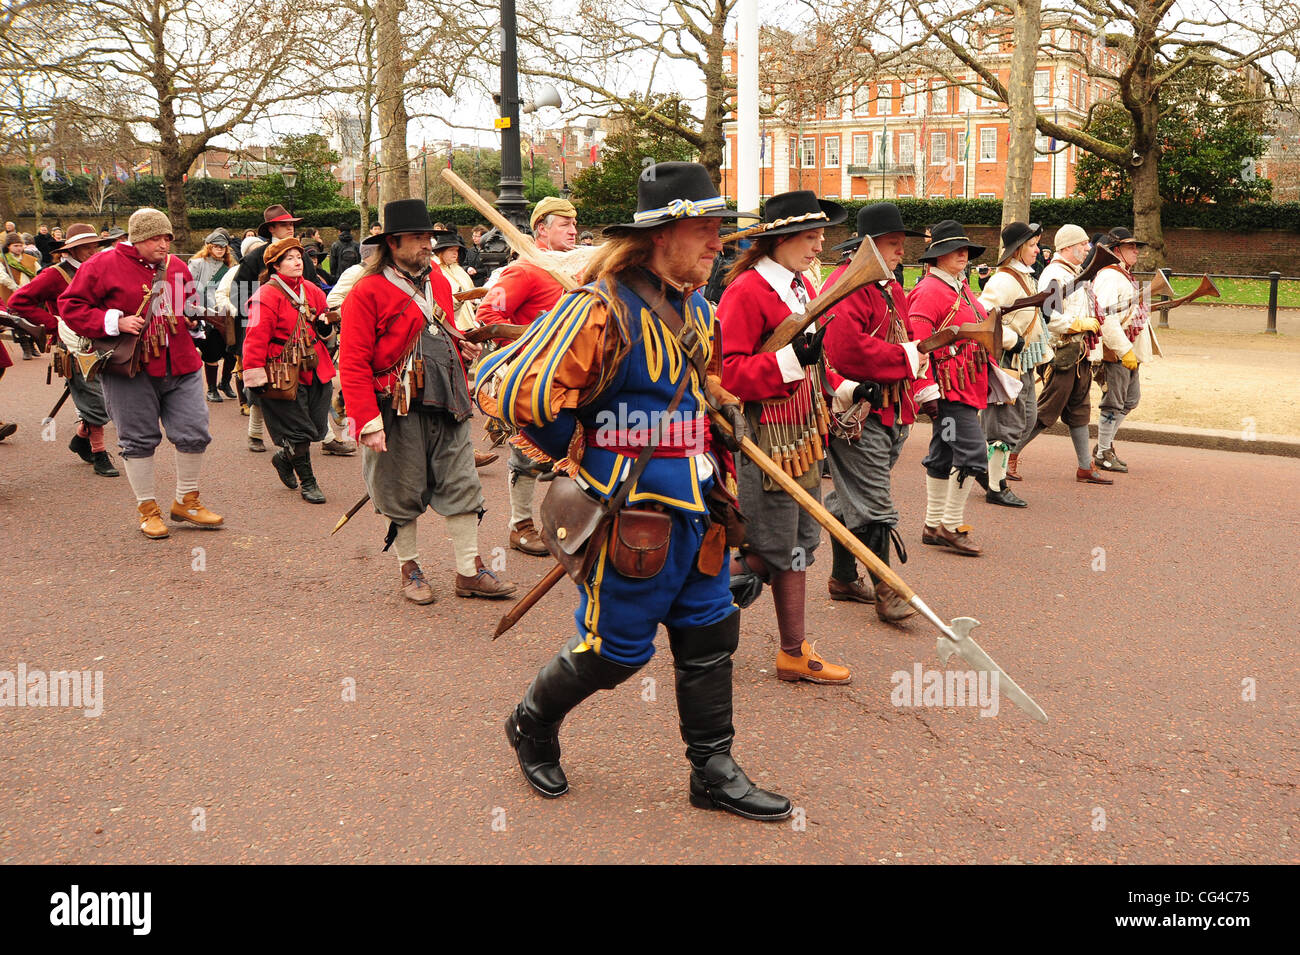 Charles I Commemoration march. The event commemorates the execution of King Charles I on 30 January 1649. London, England - 30.01.11 Stock Photo